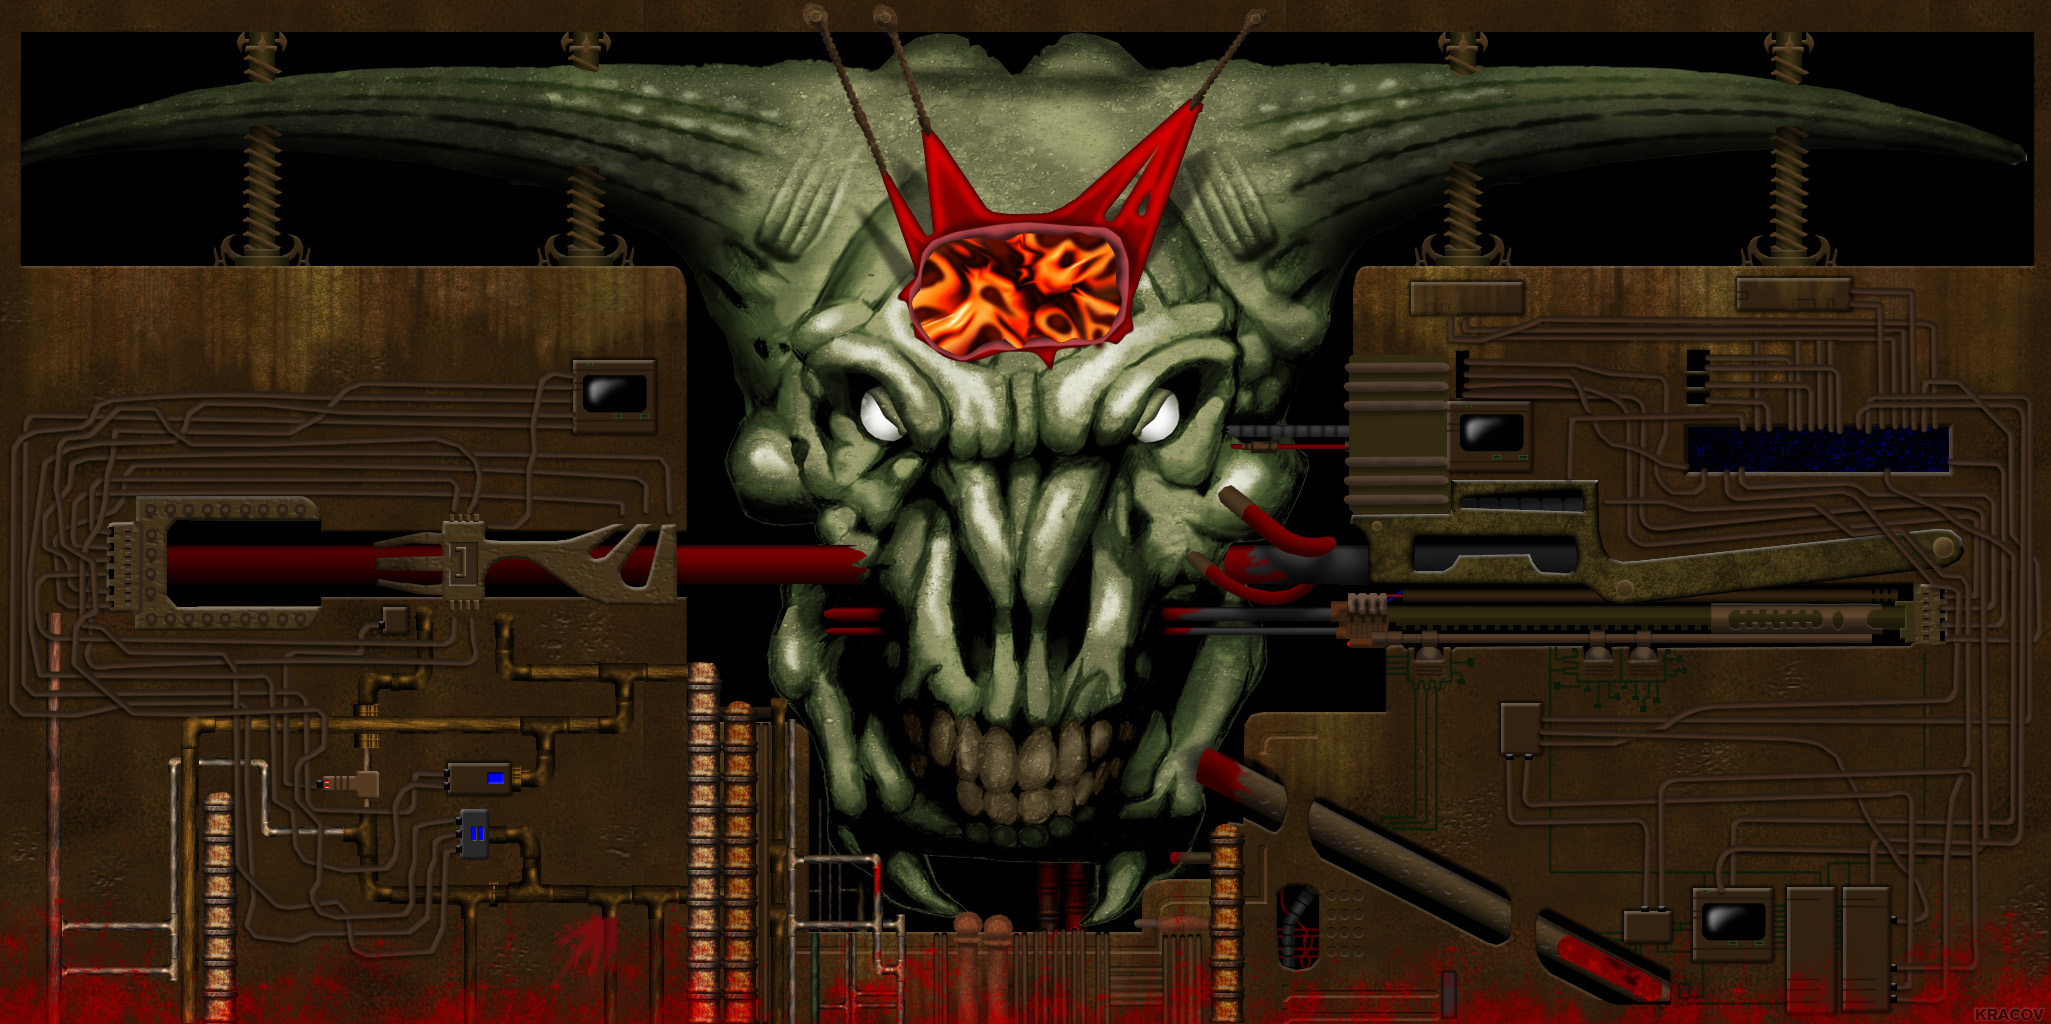 Icon of Sin, DOOM 2. Just a boring wall texture with a brain you can shoot ...